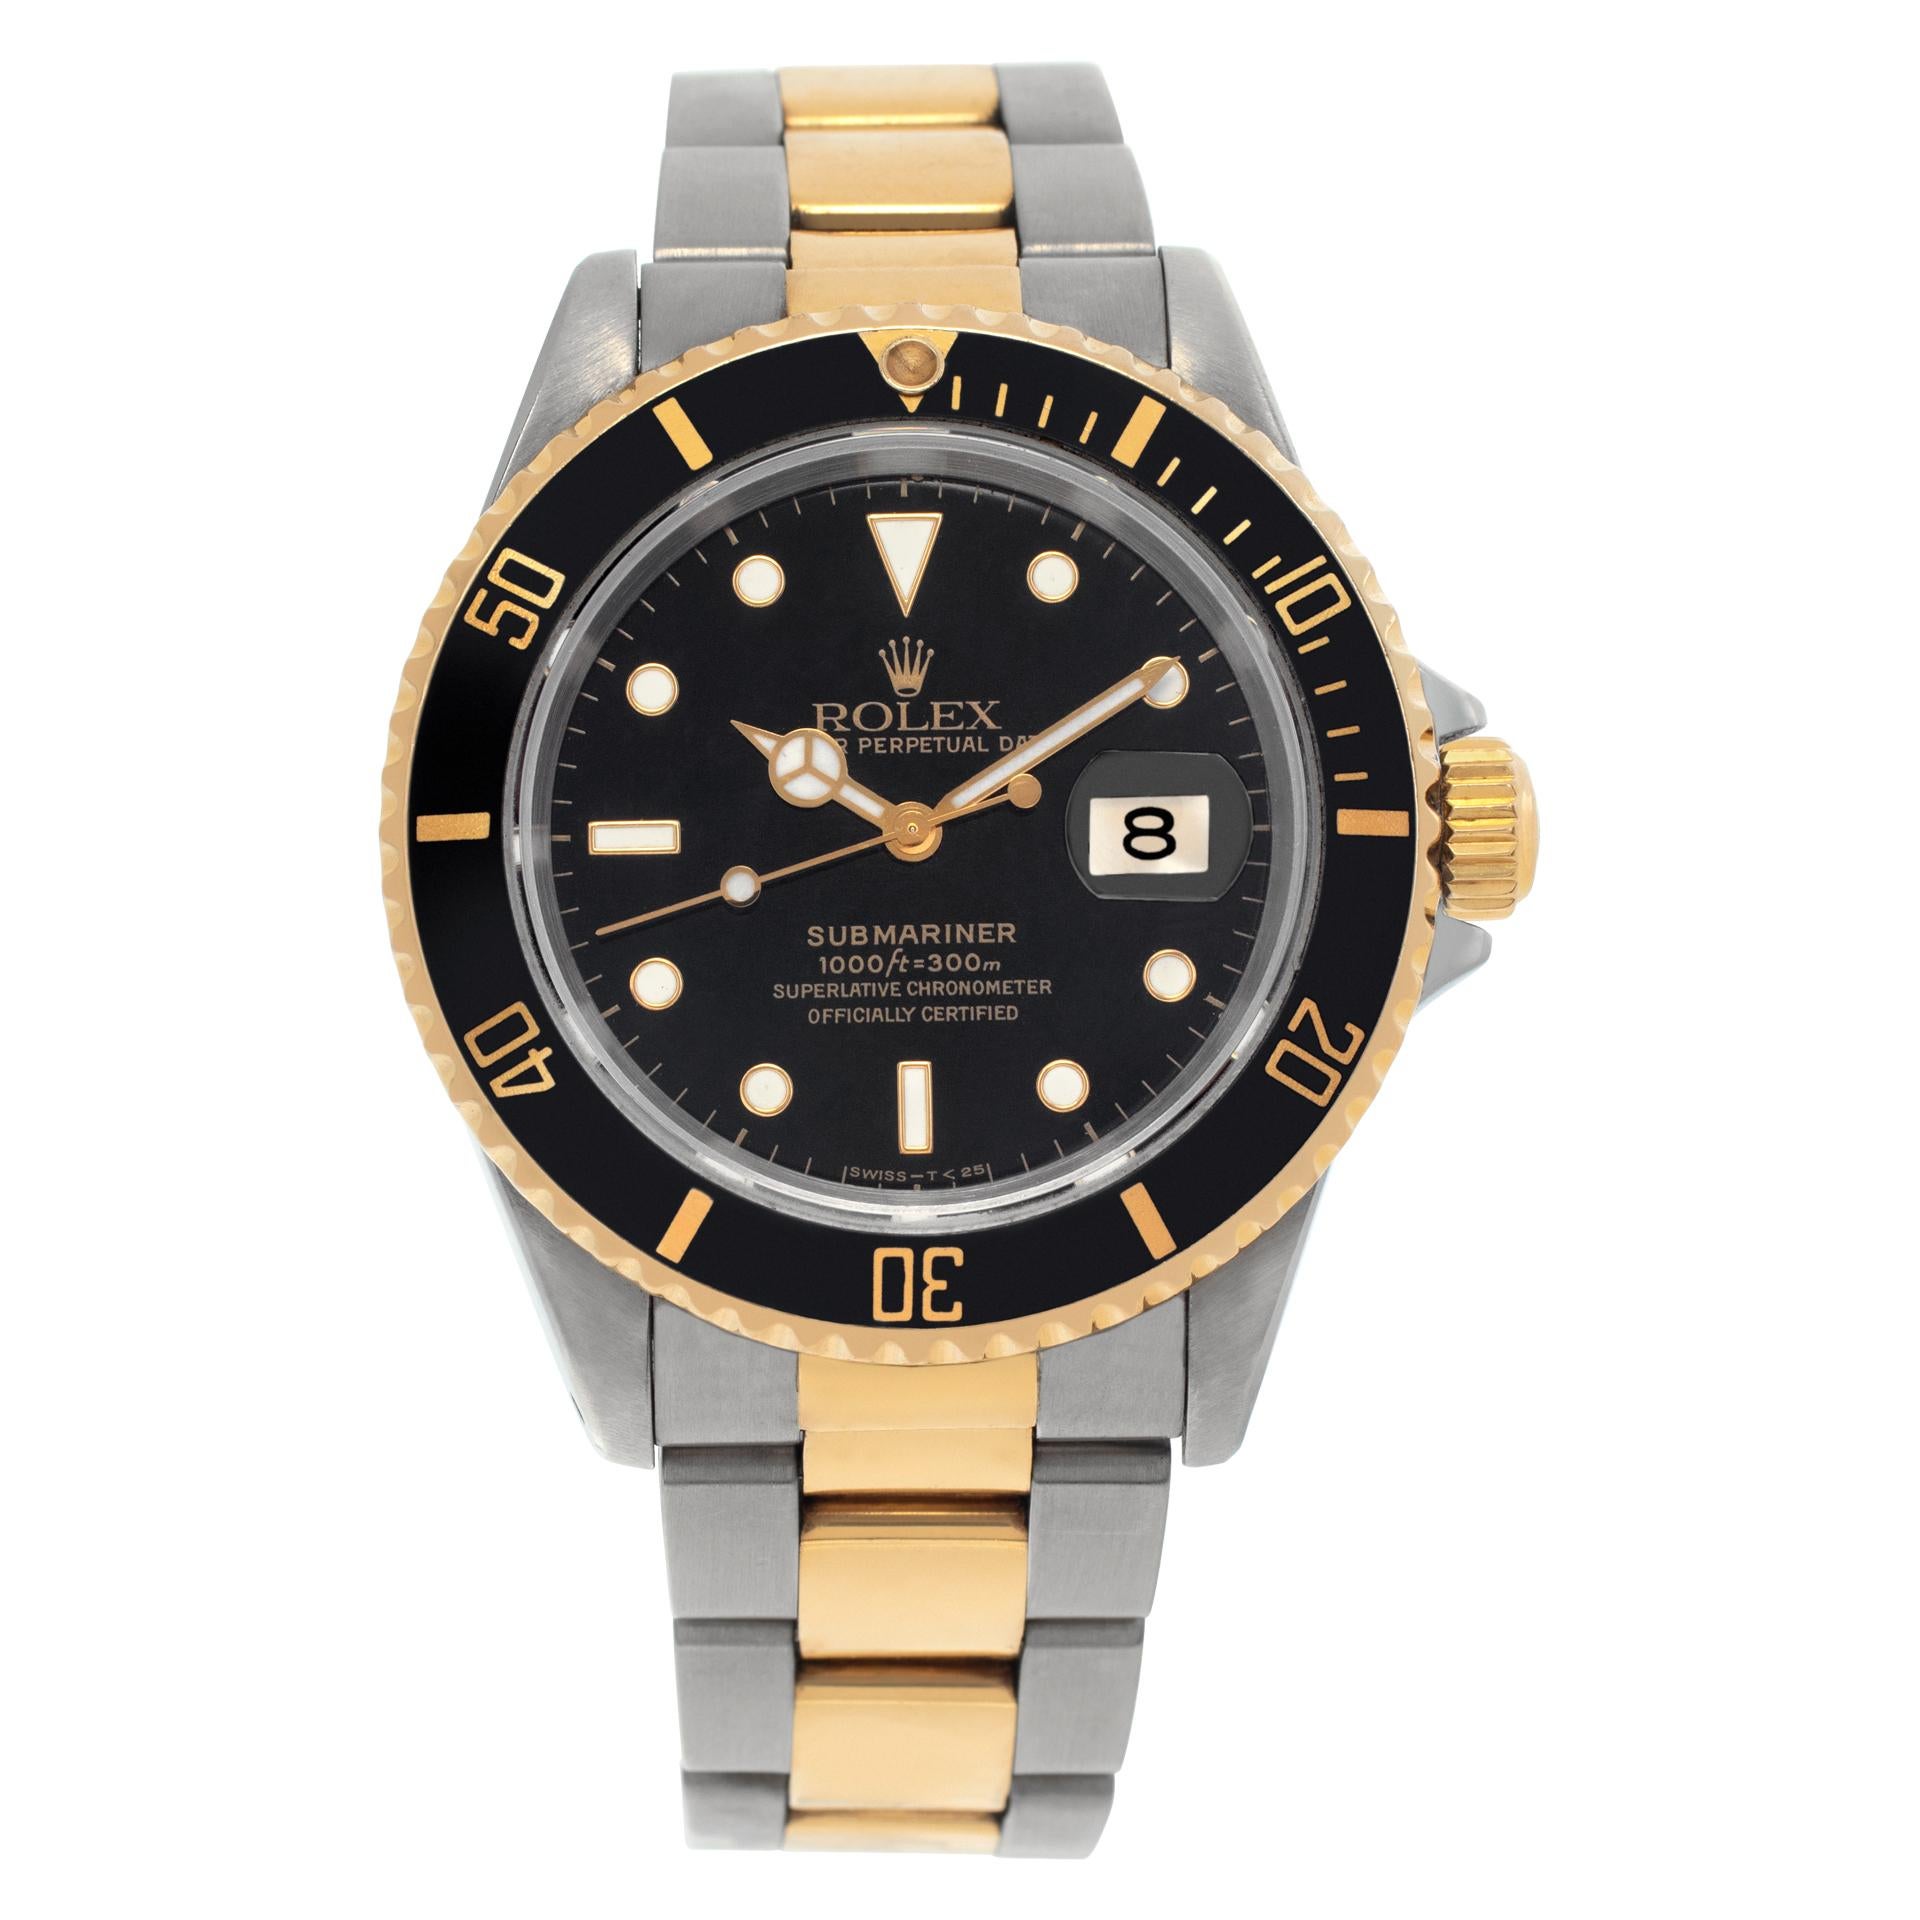 Rolex Submariner 16613 in Stainless Steel with a Black dial 40mm Automatic watch